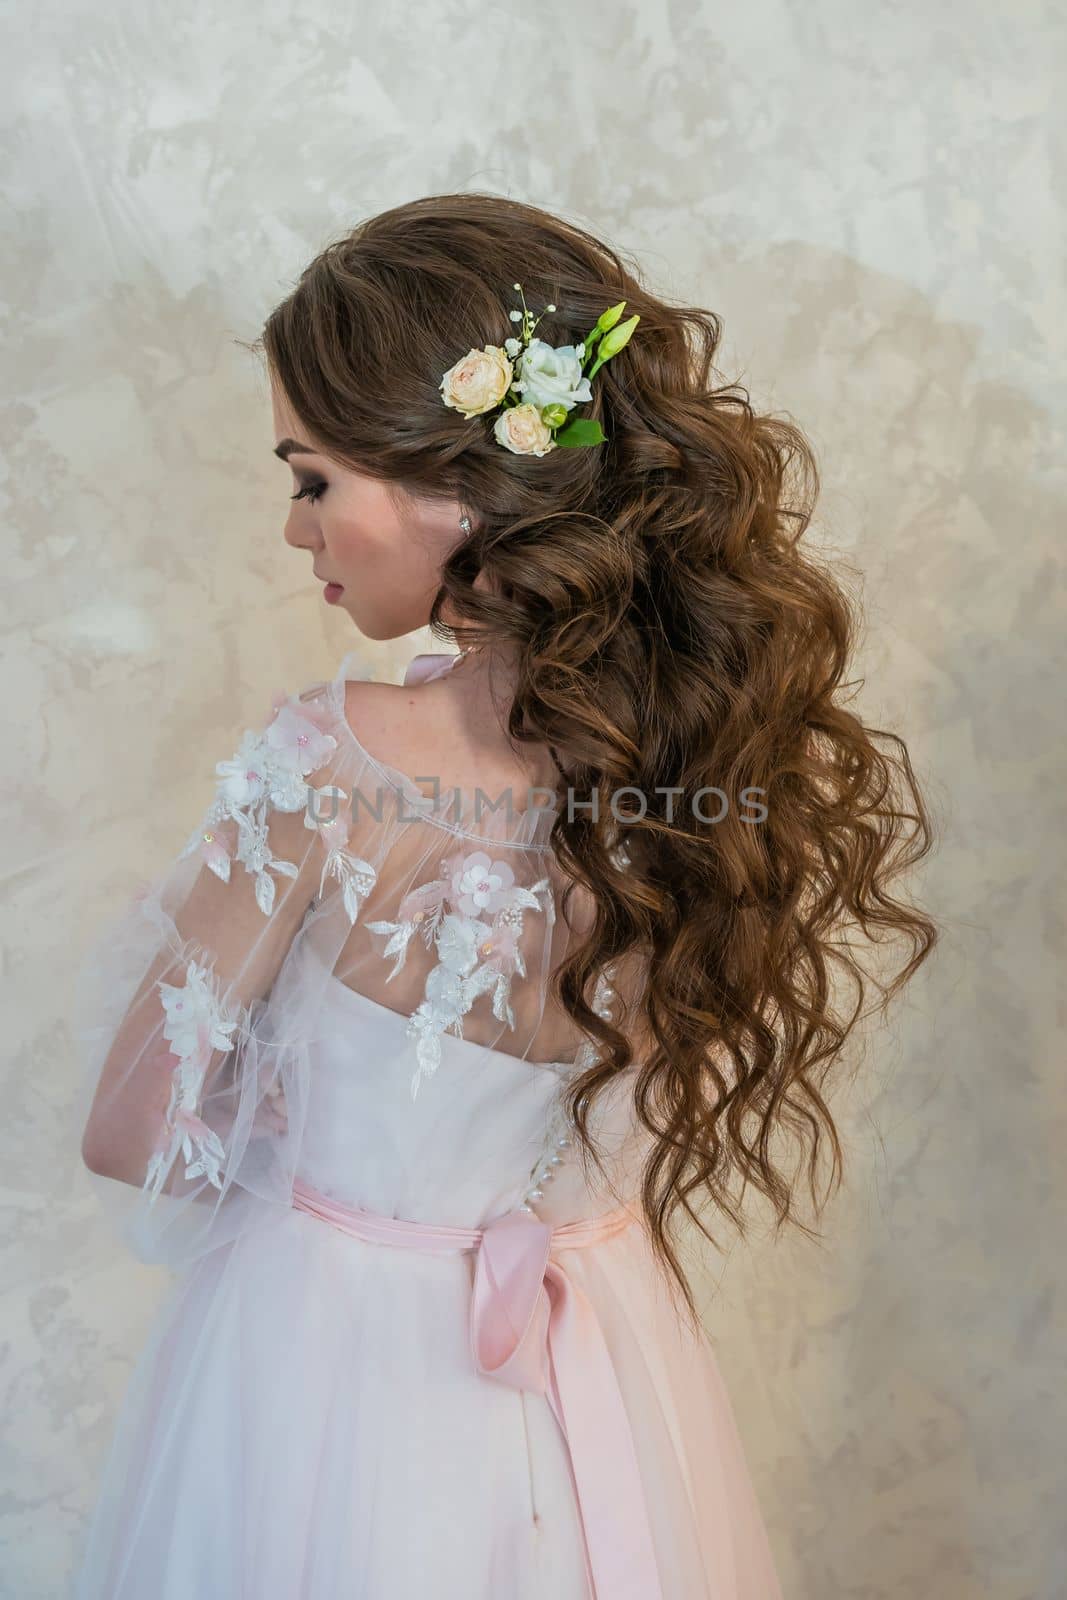 A girl with spinners demonstrates a wedding hairstyle. by DovidPro